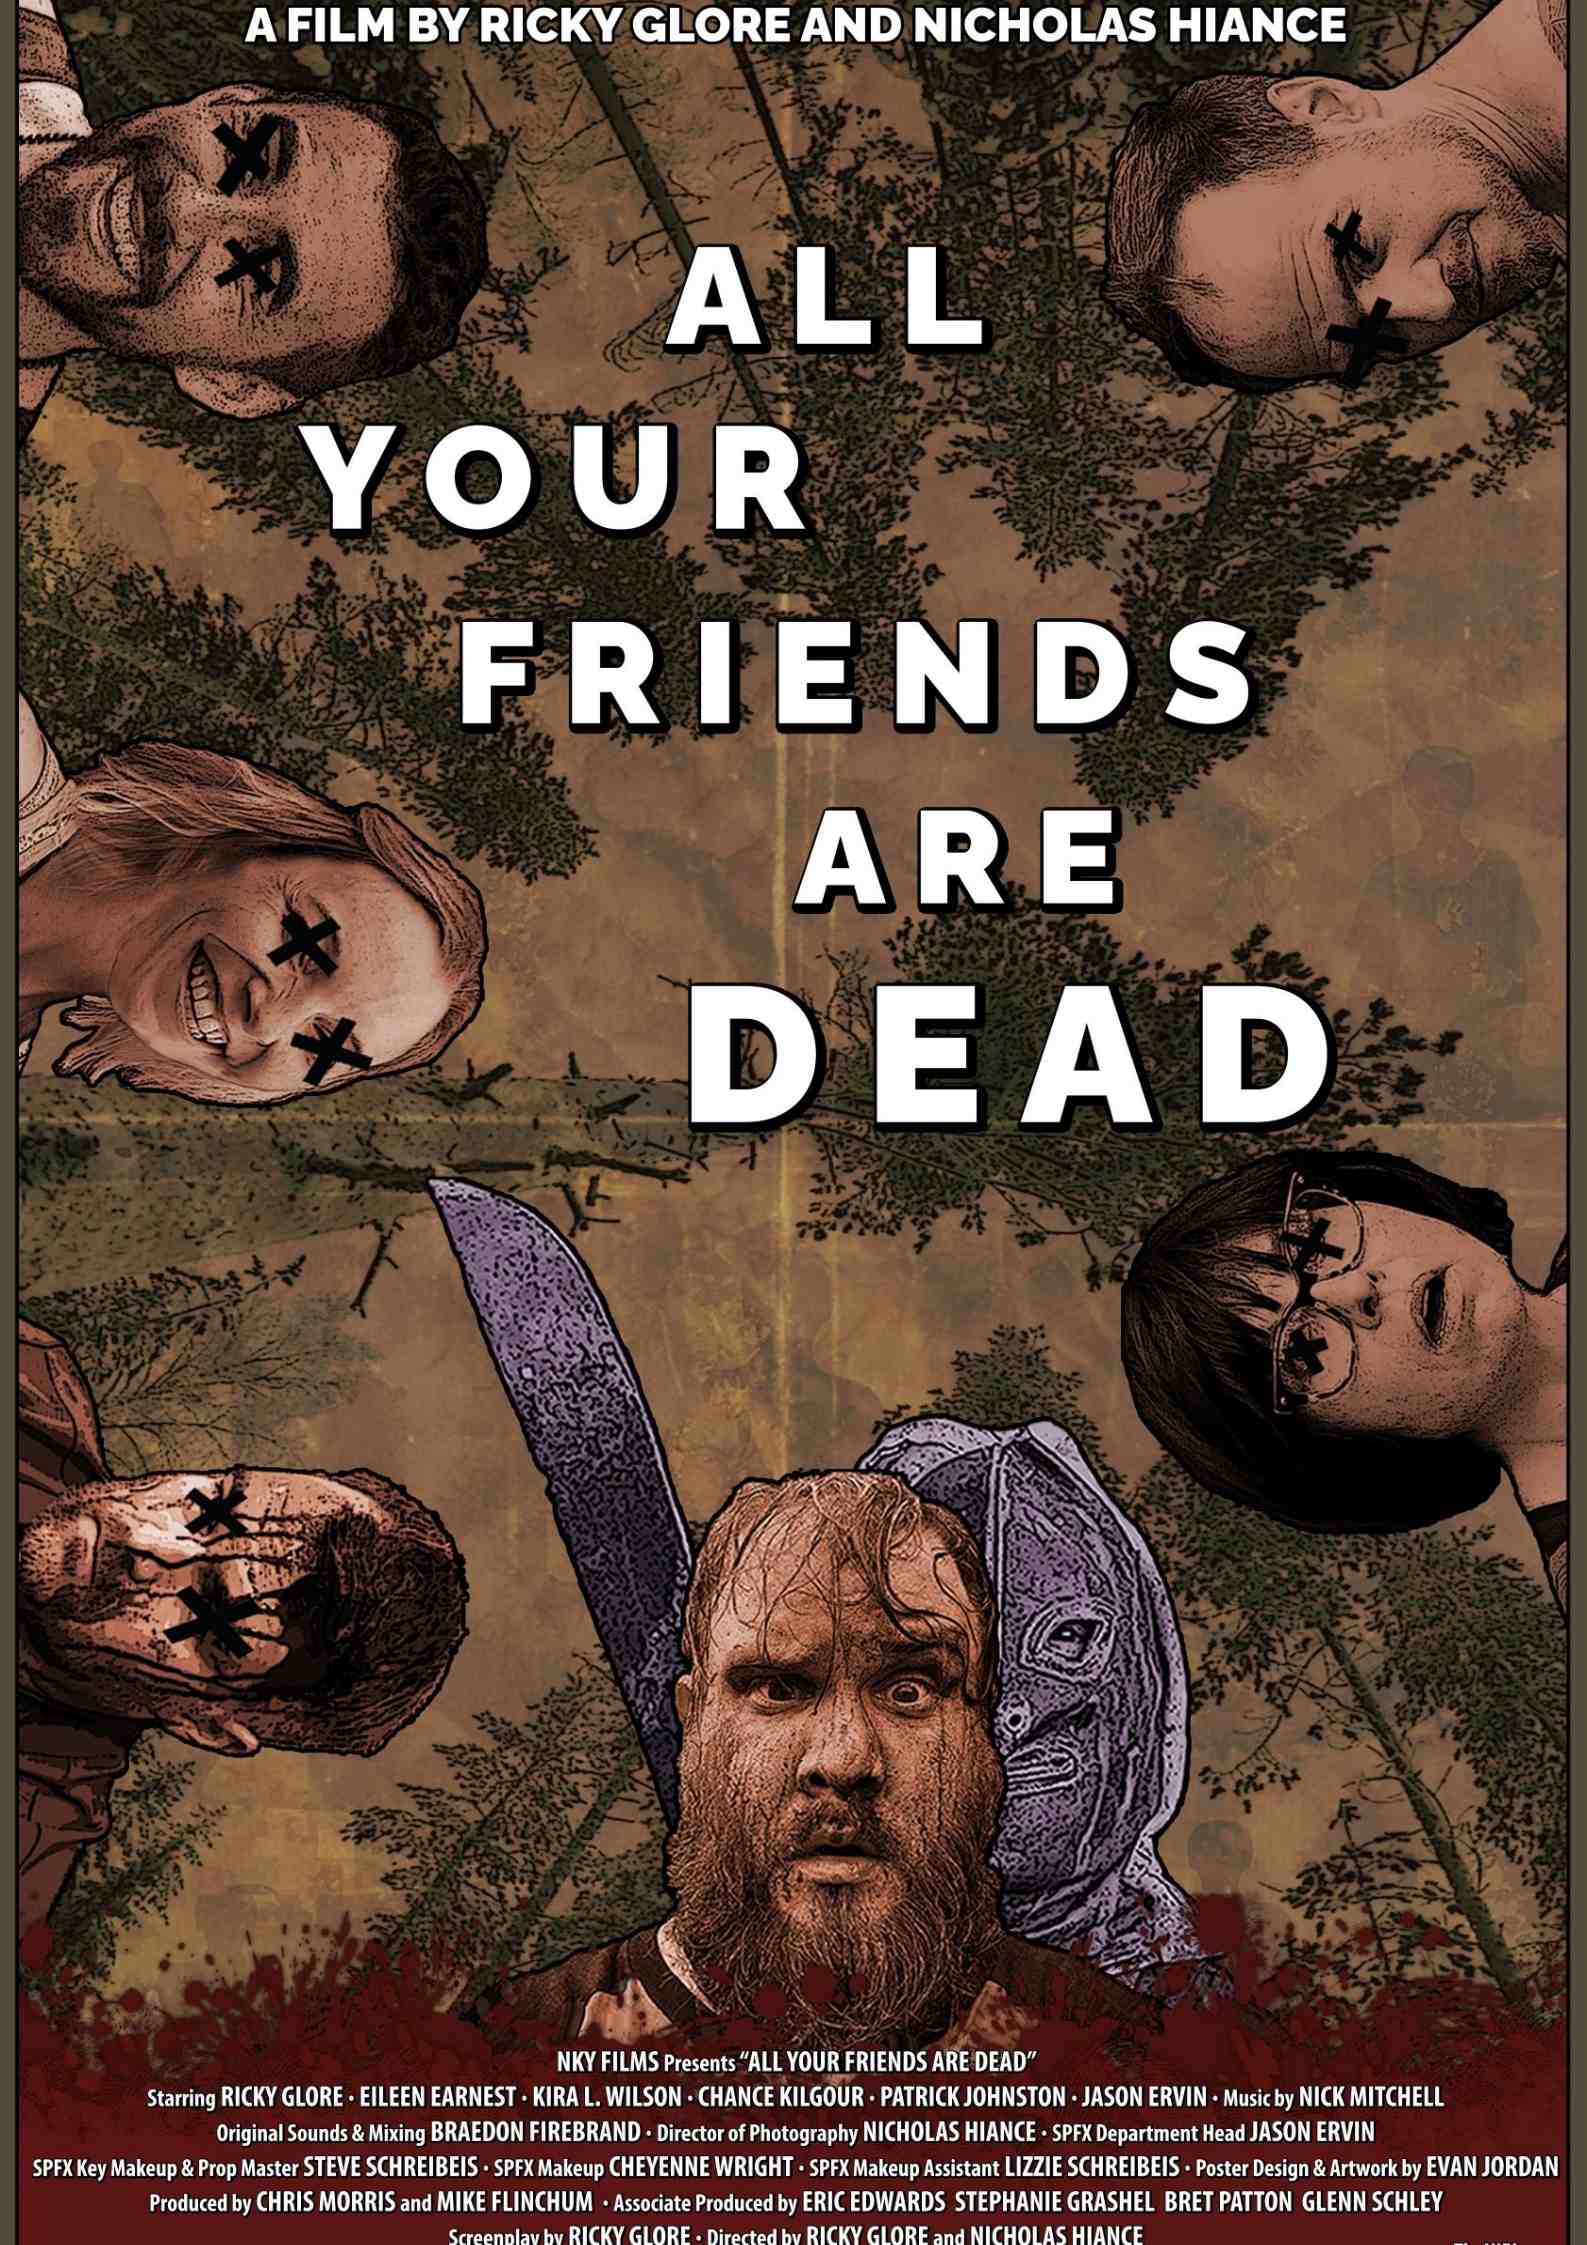 All your friends are dead